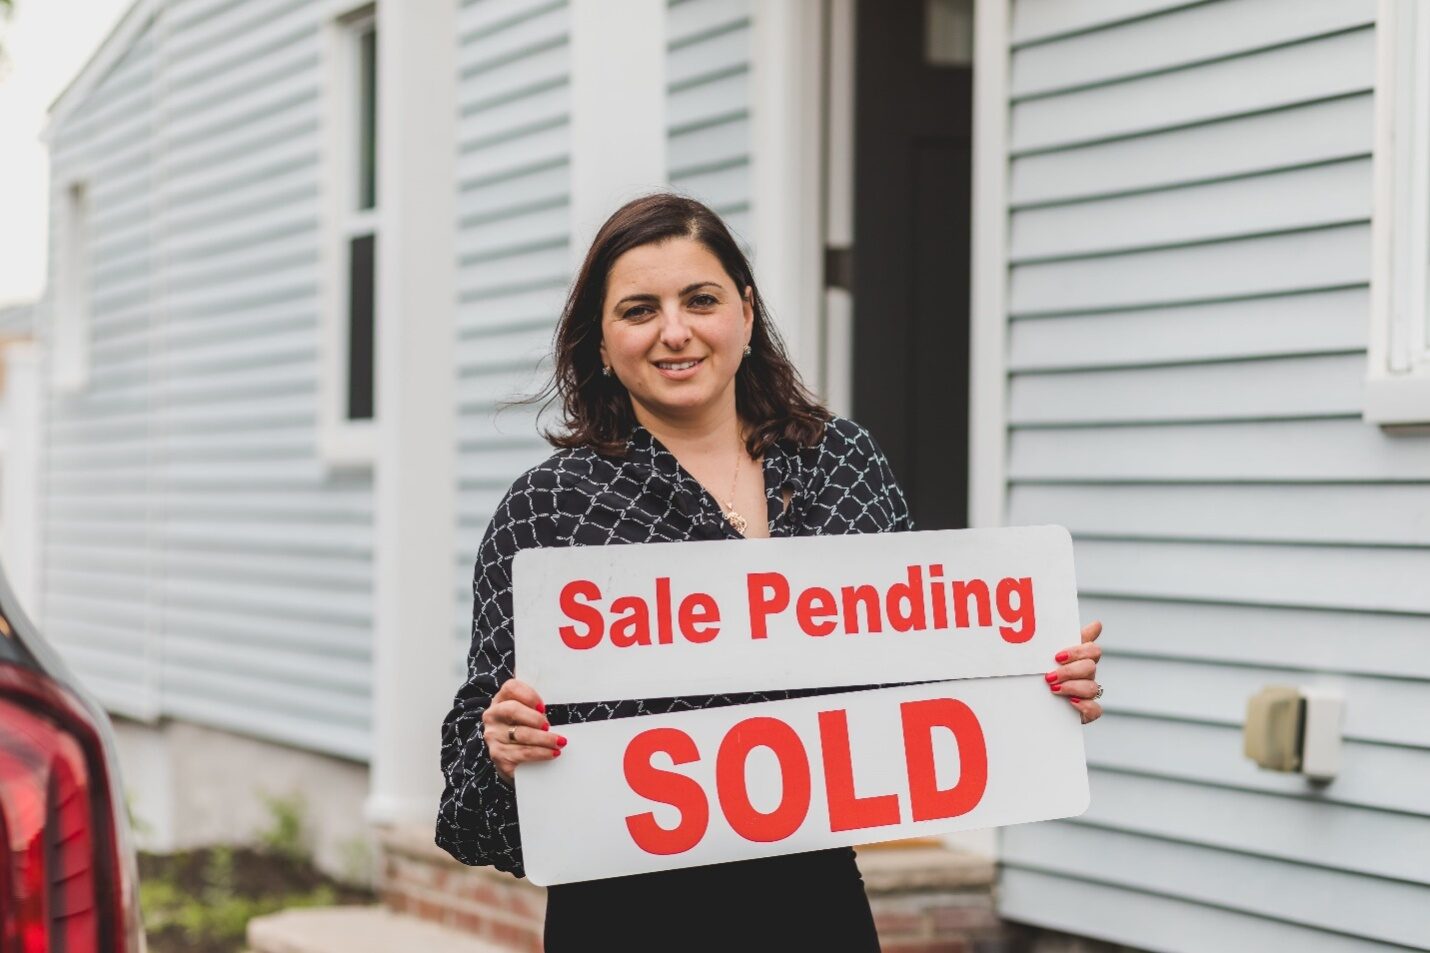 Realtor Holding a ‘Sale Pending’ Sign